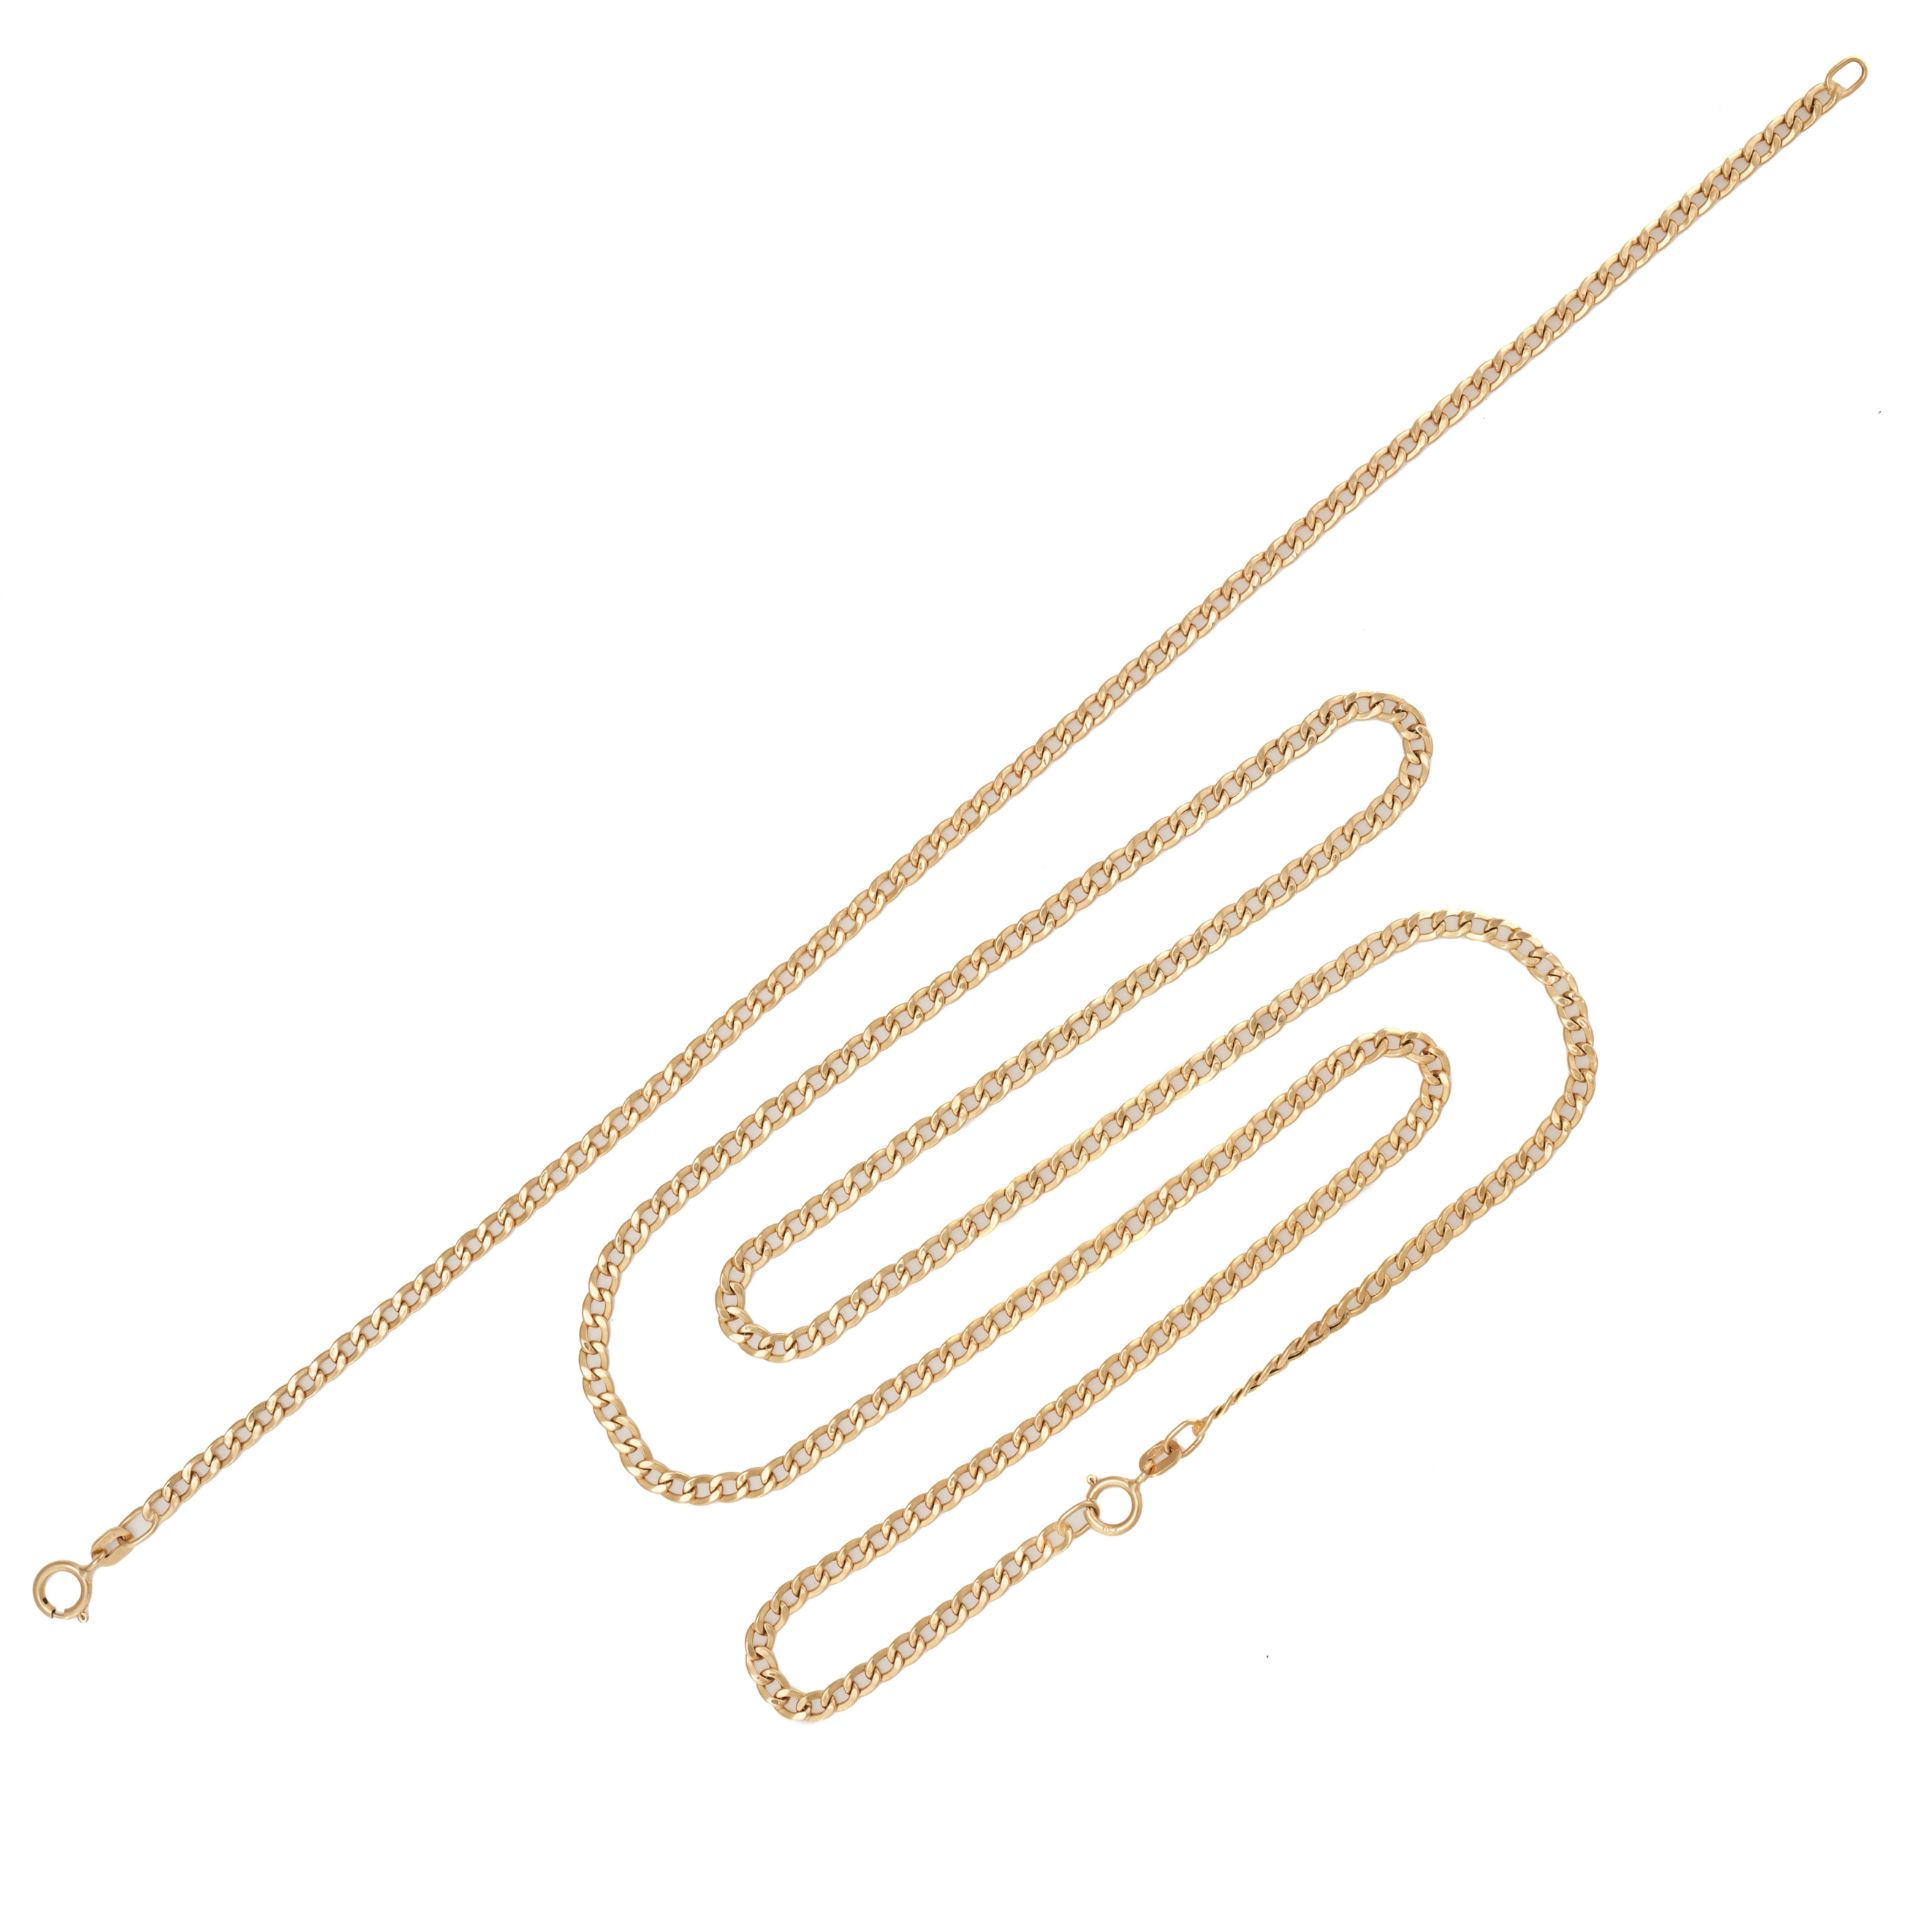 A GOLD CURB LINK CHAIN AND BRACELET in 18ct yellow gold, stamped 750, chain 51.0cm, bracelet 19.5...